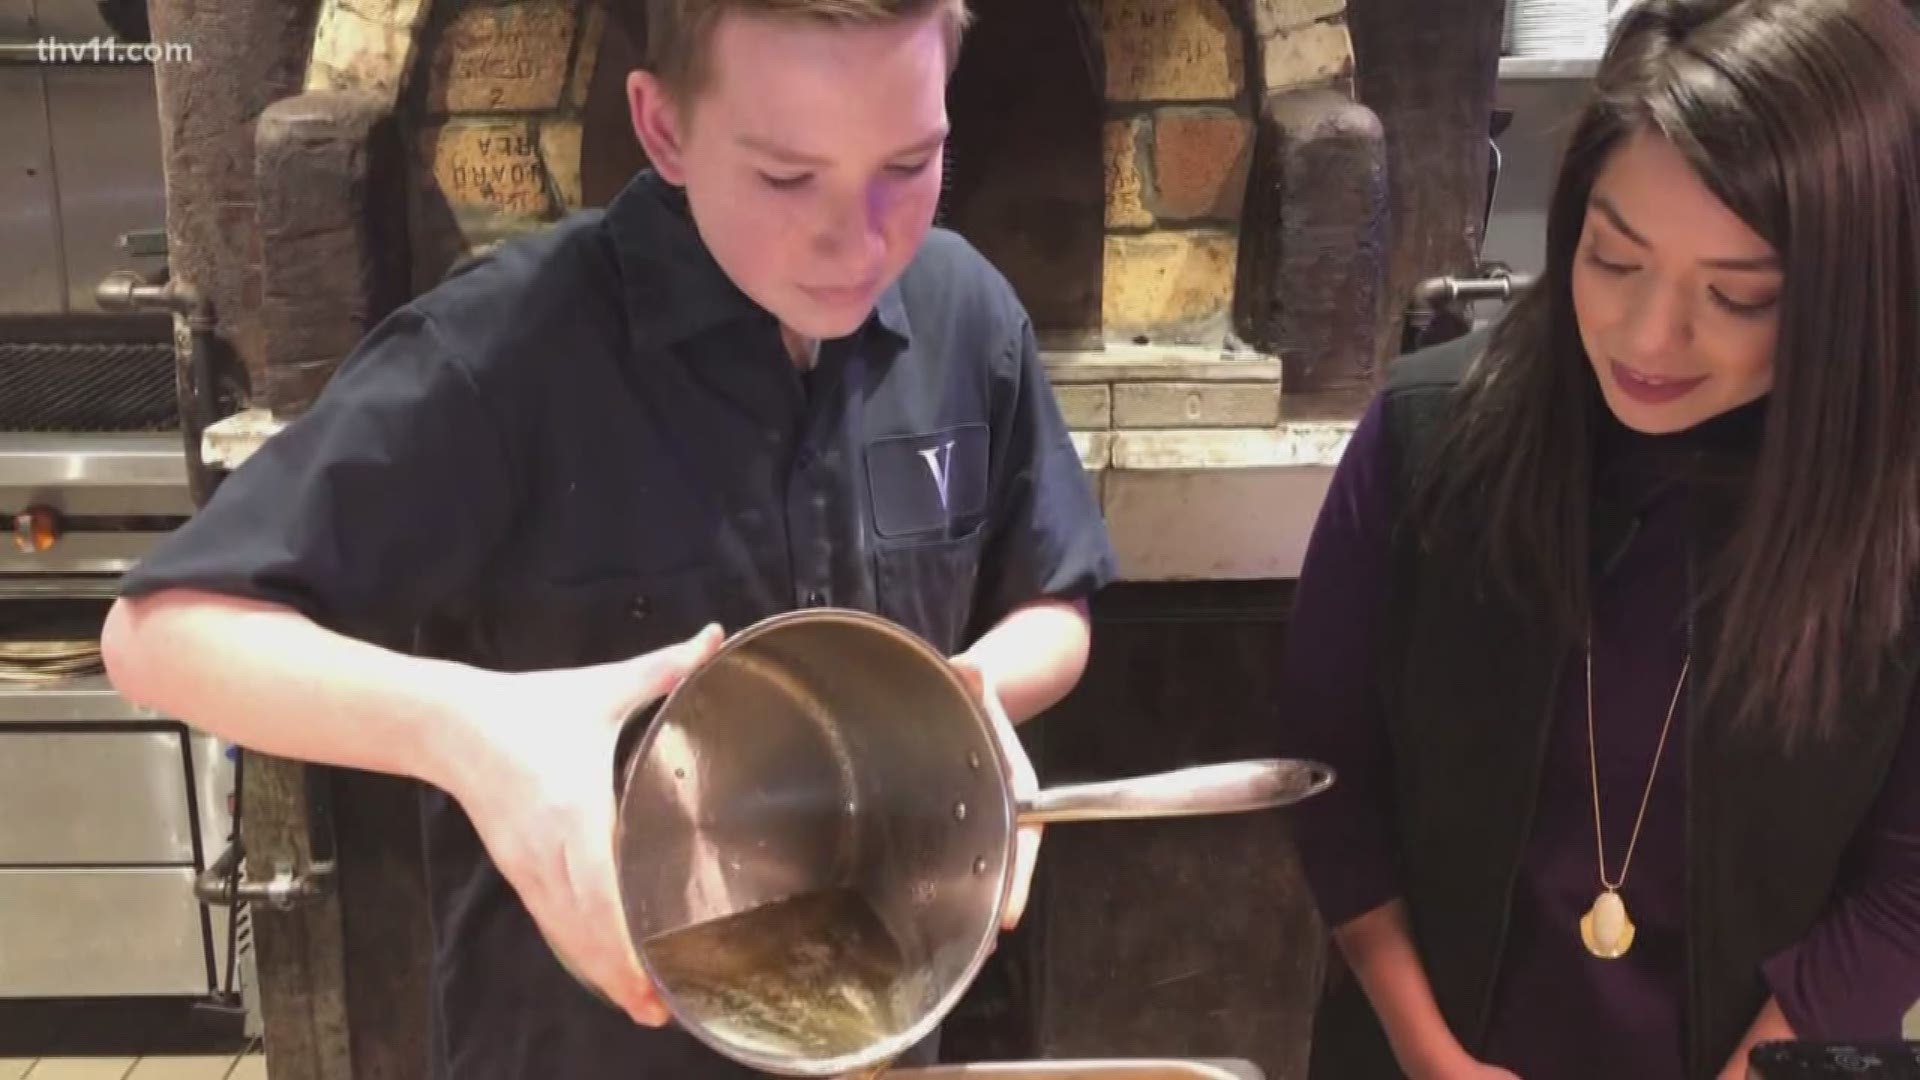 A teen went to Greece to learn the culinary arts, thanks to Make-A-Wish.